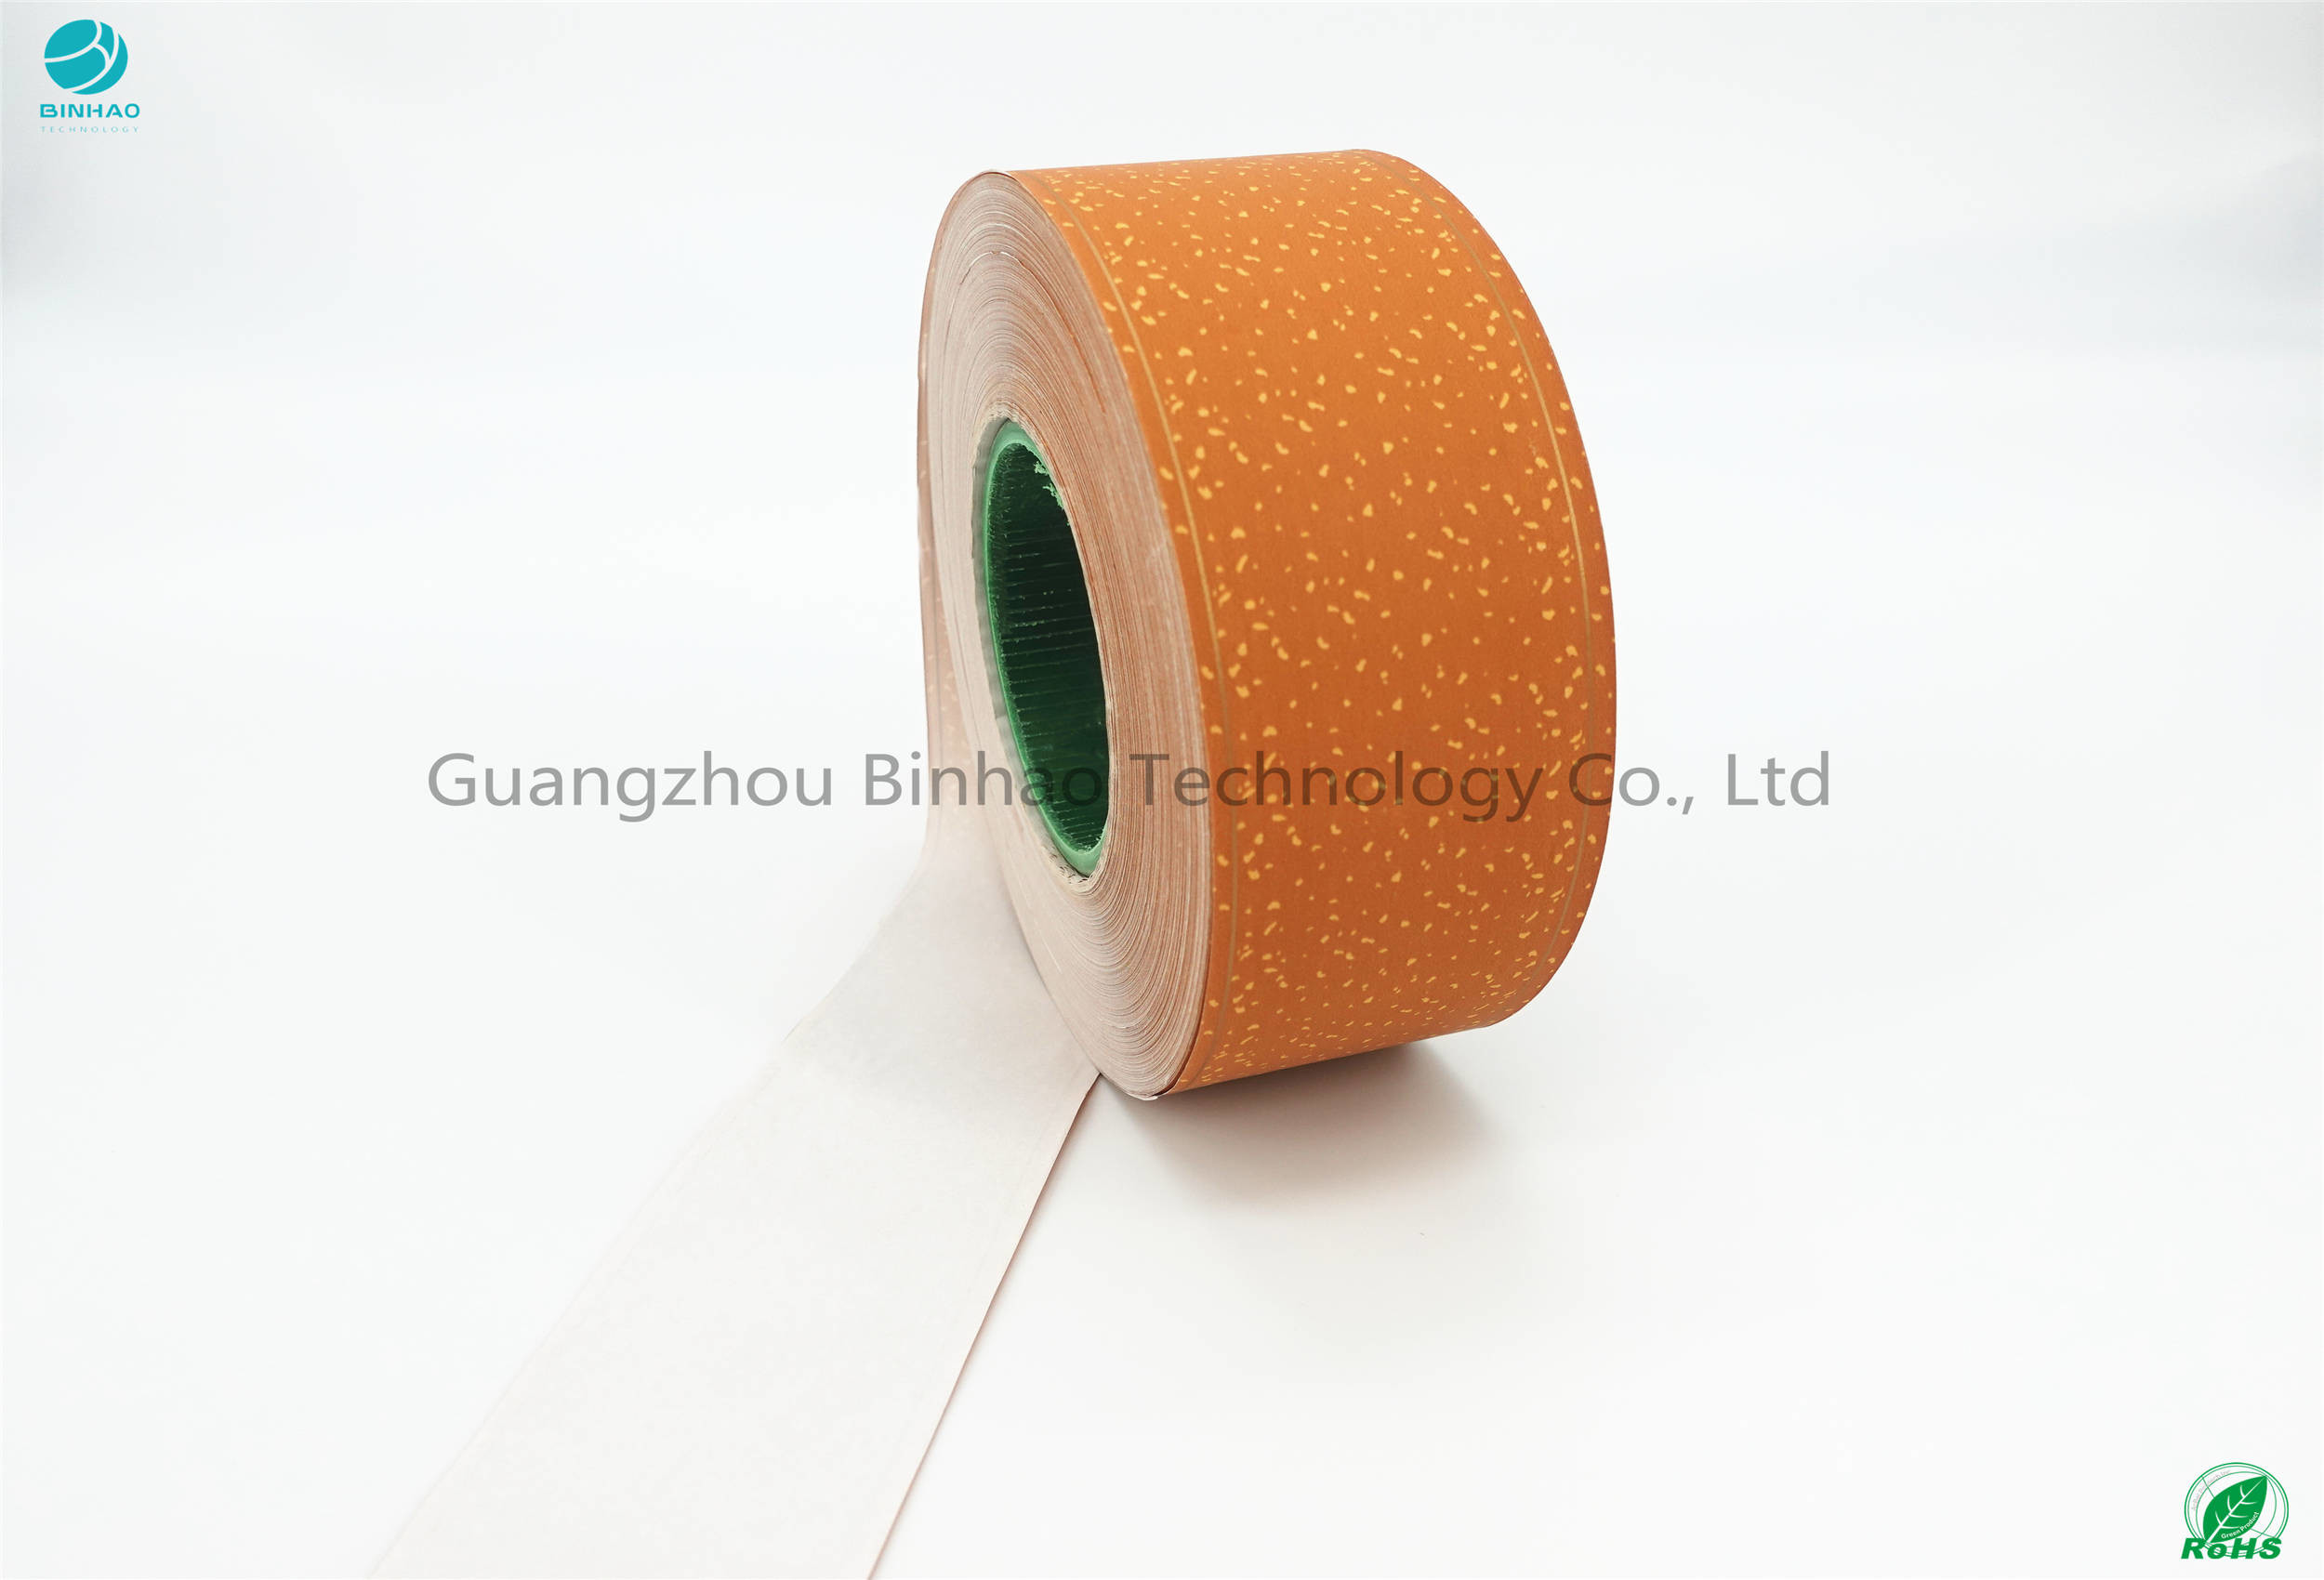 3000 Meter Long Cork Tipping Paper 2 Printing Colour